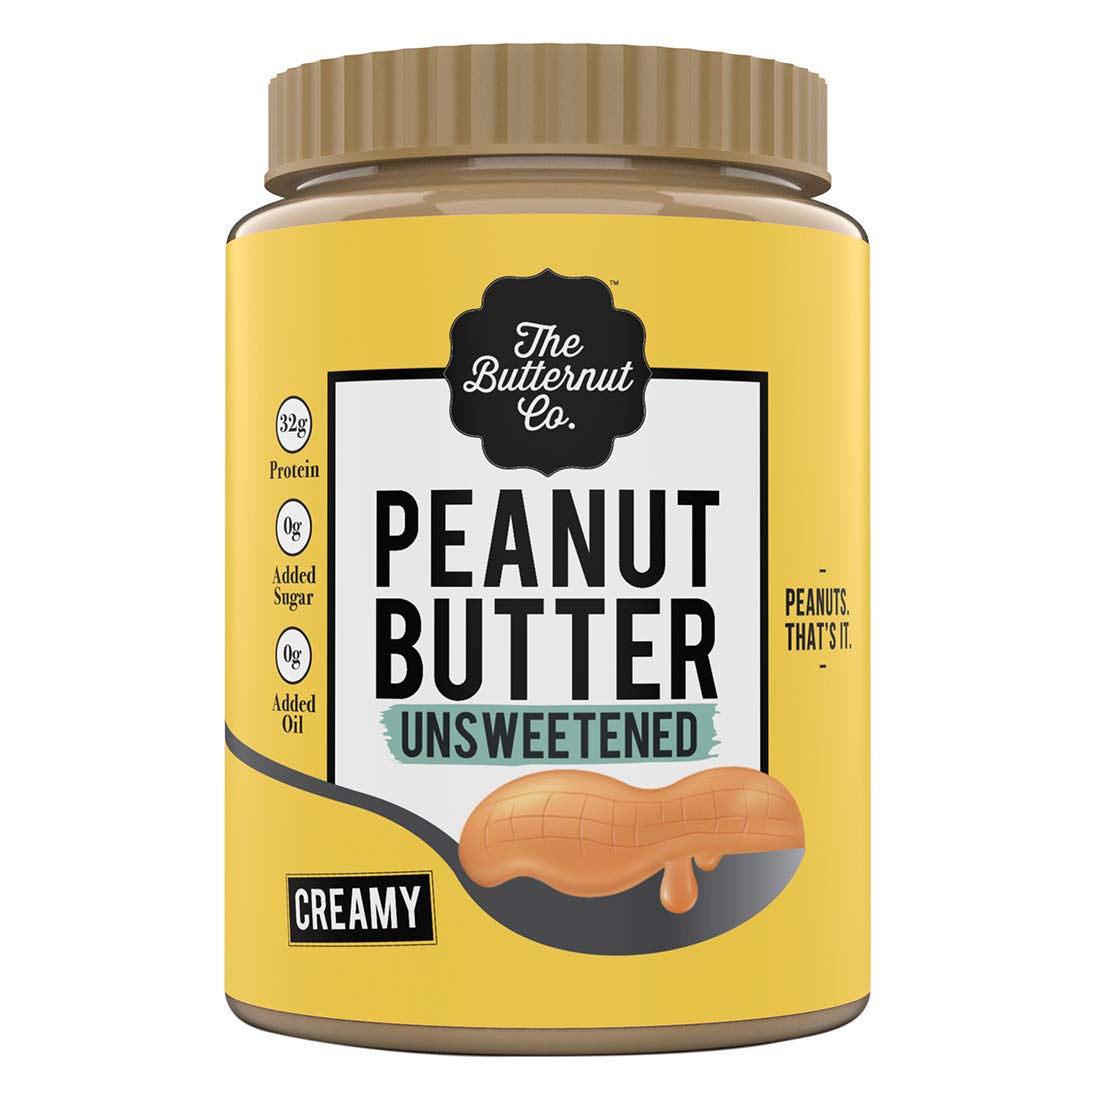 The Butternut Co. Creamy Unsweetened Peanut Butter 1Kg| 32 g High-Protein Nut Butter for Weight Gain, Pre & Post Workout | Healthy, Natural, Sugar-Free, 100% Pure Roasted Peanut